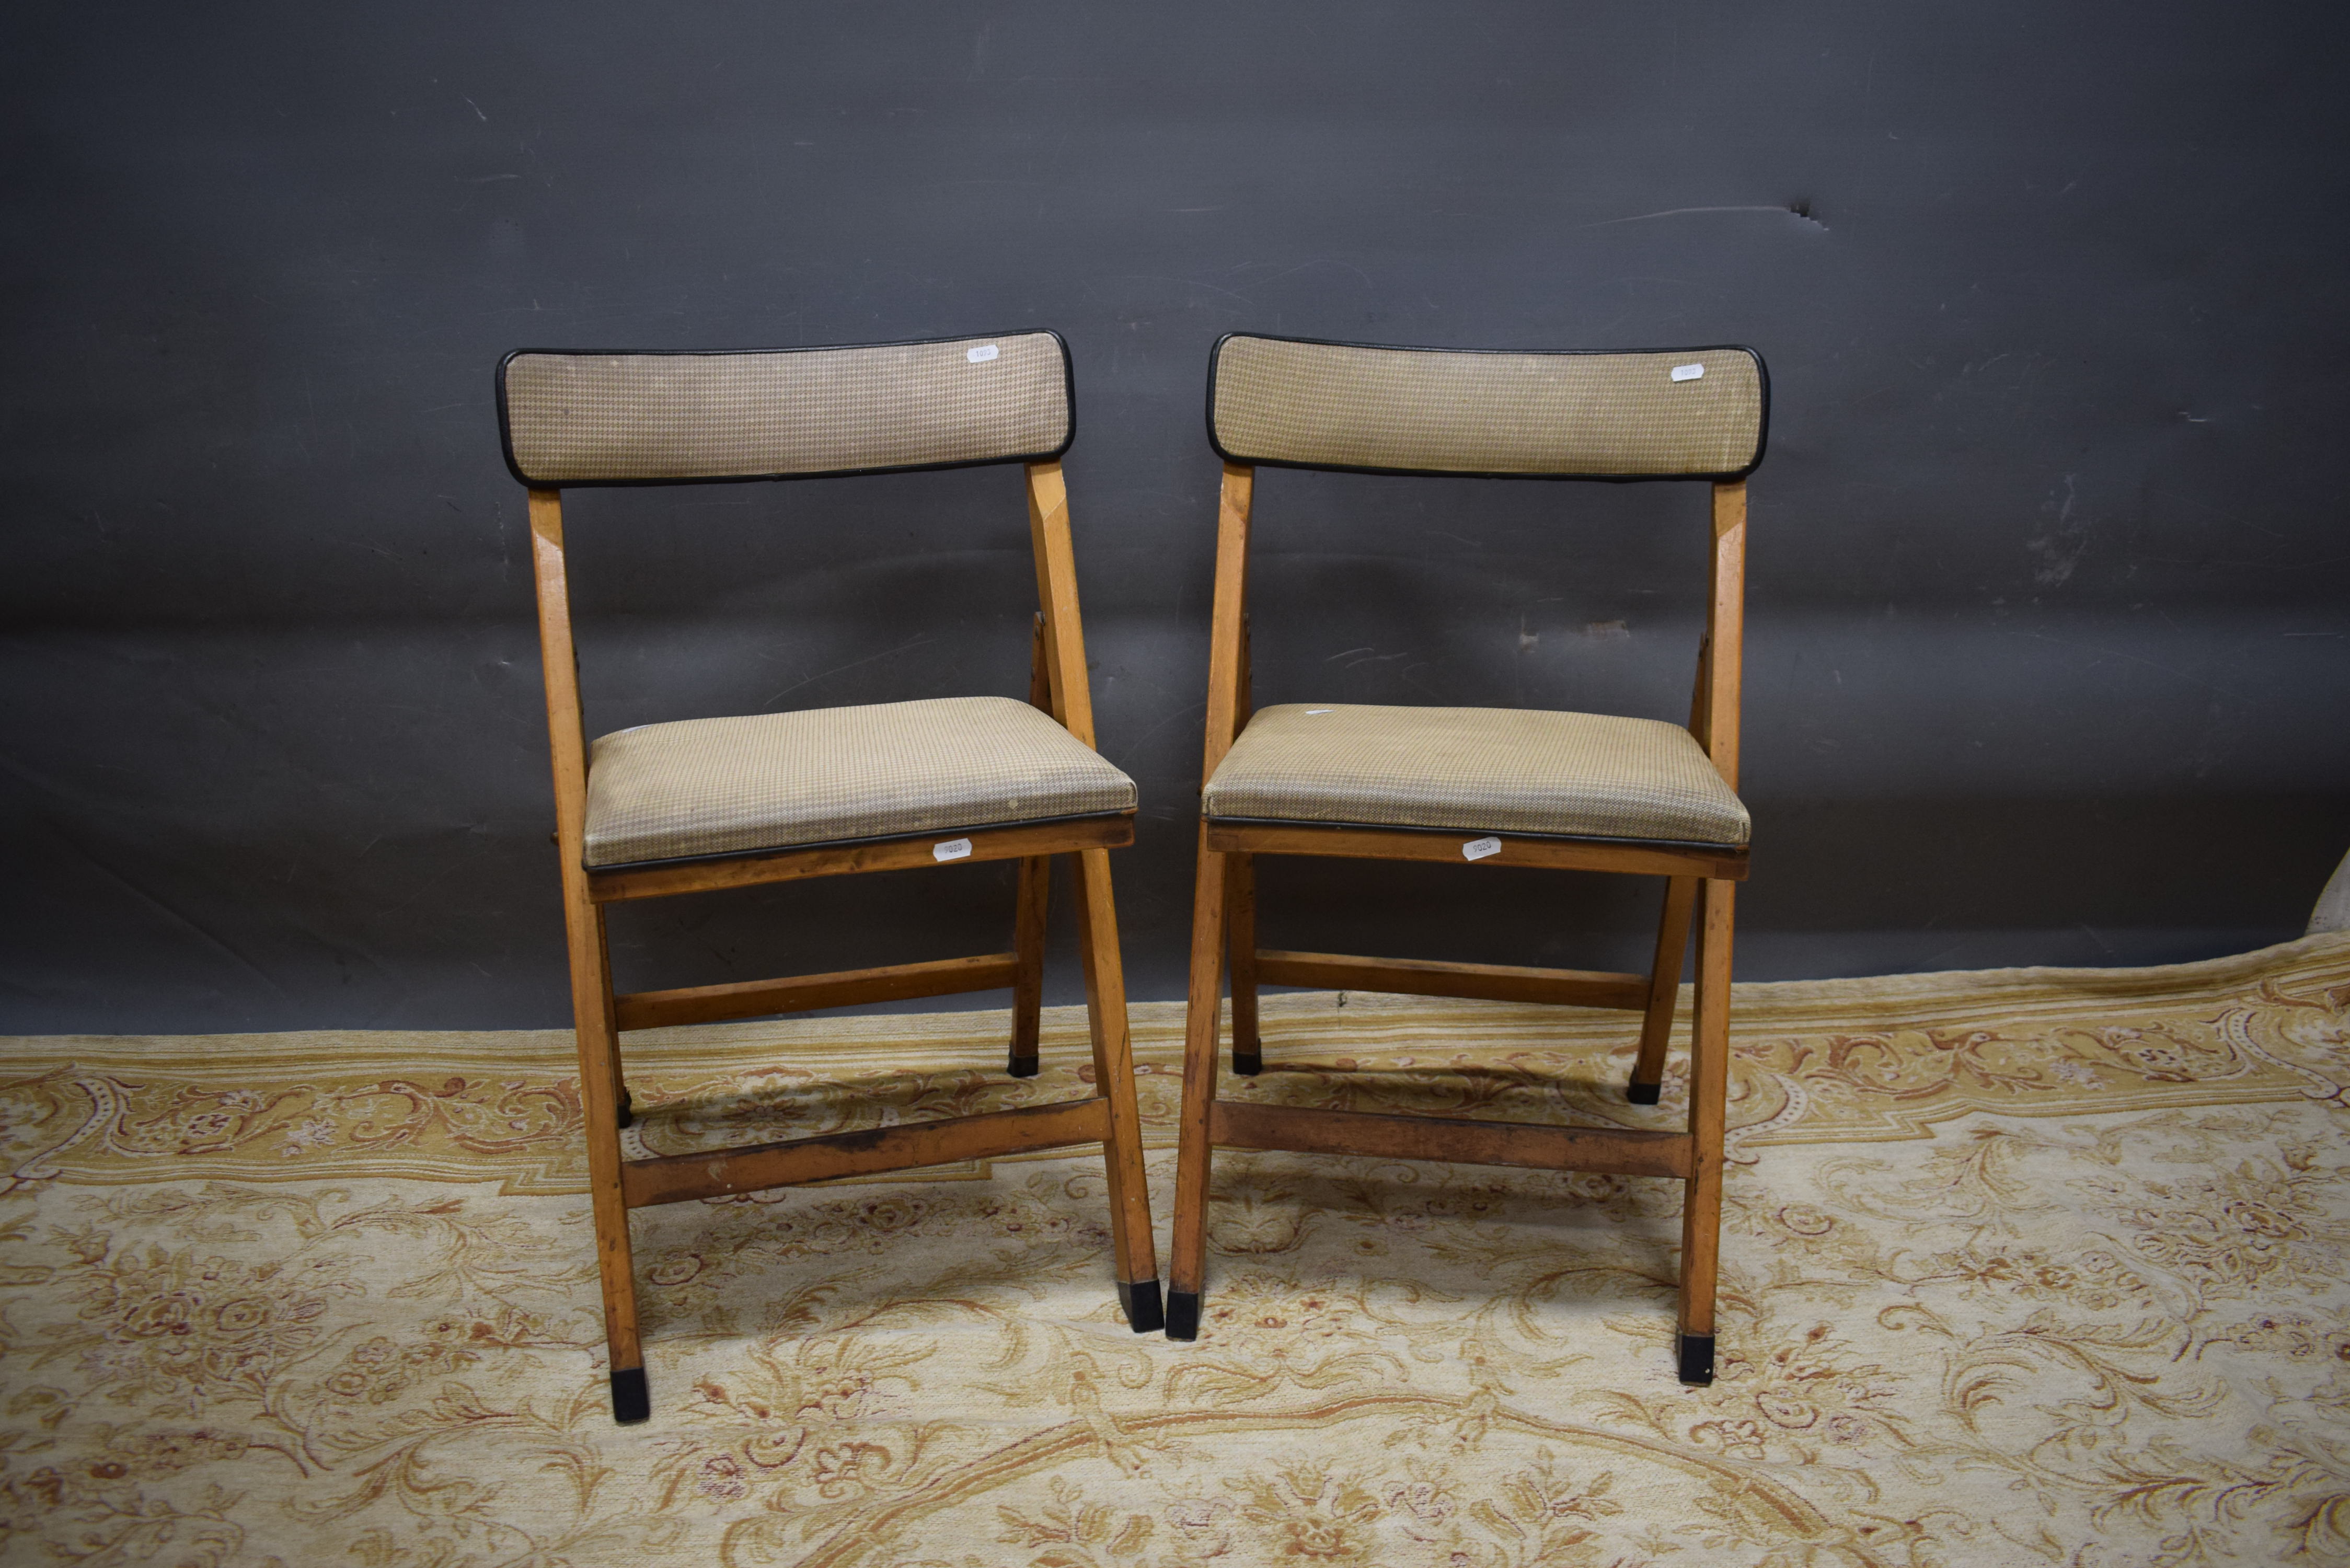 Pair of Stylish 1930's Era Folding chairs with padded top and back support. See photos. 